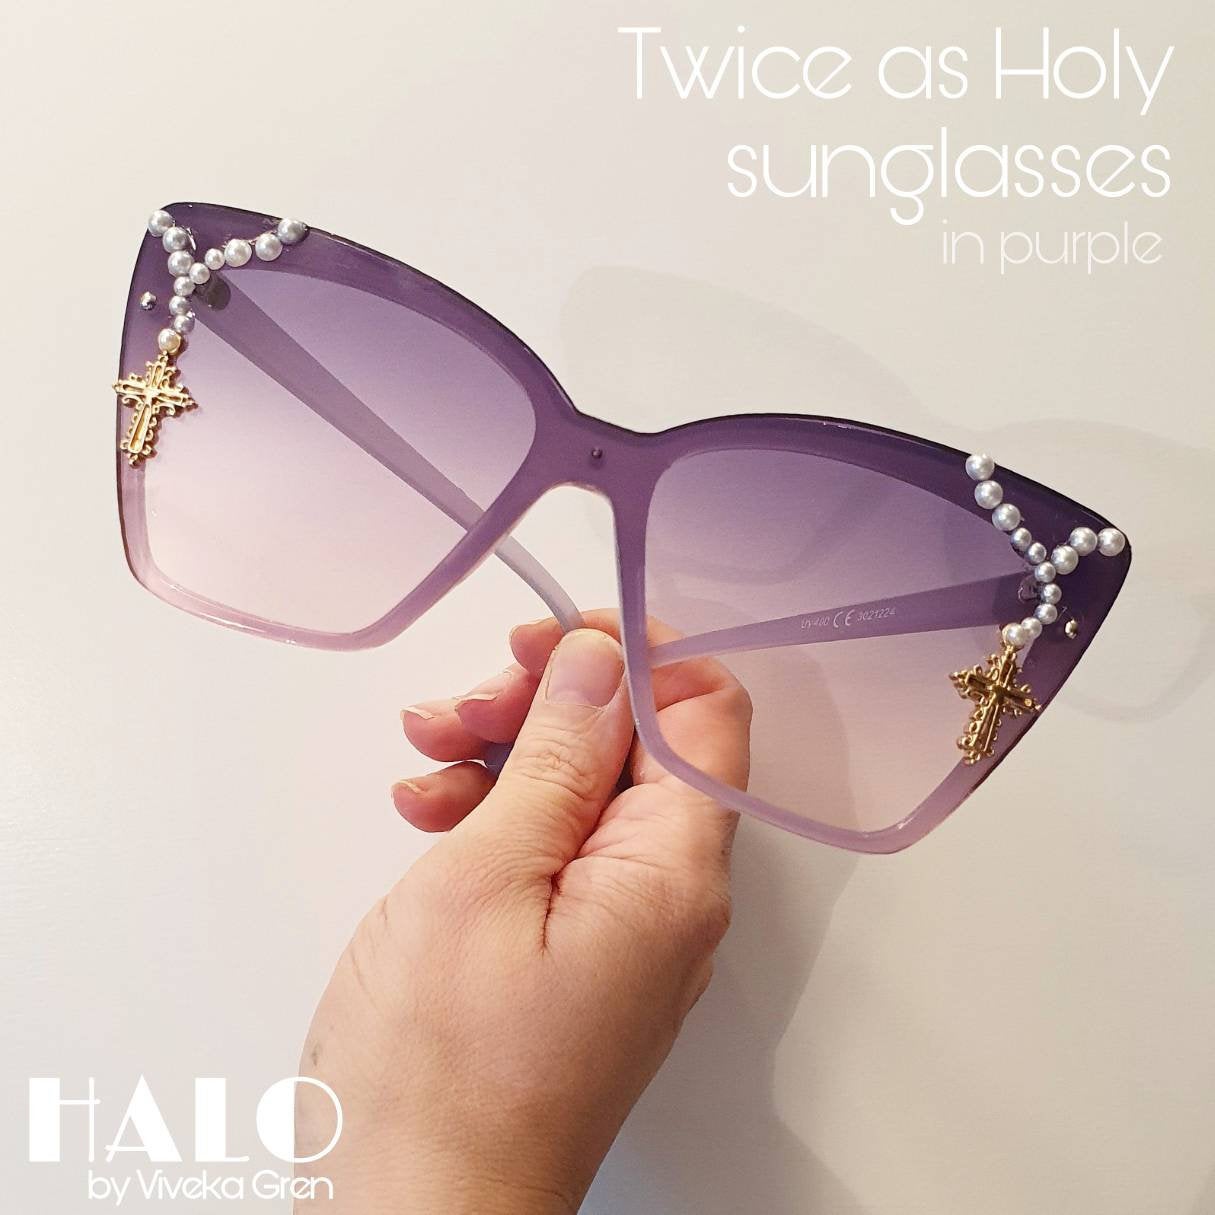 Sacrilegious Collection: The Twice as Holy sunglasses, (three colour variations) limited edition